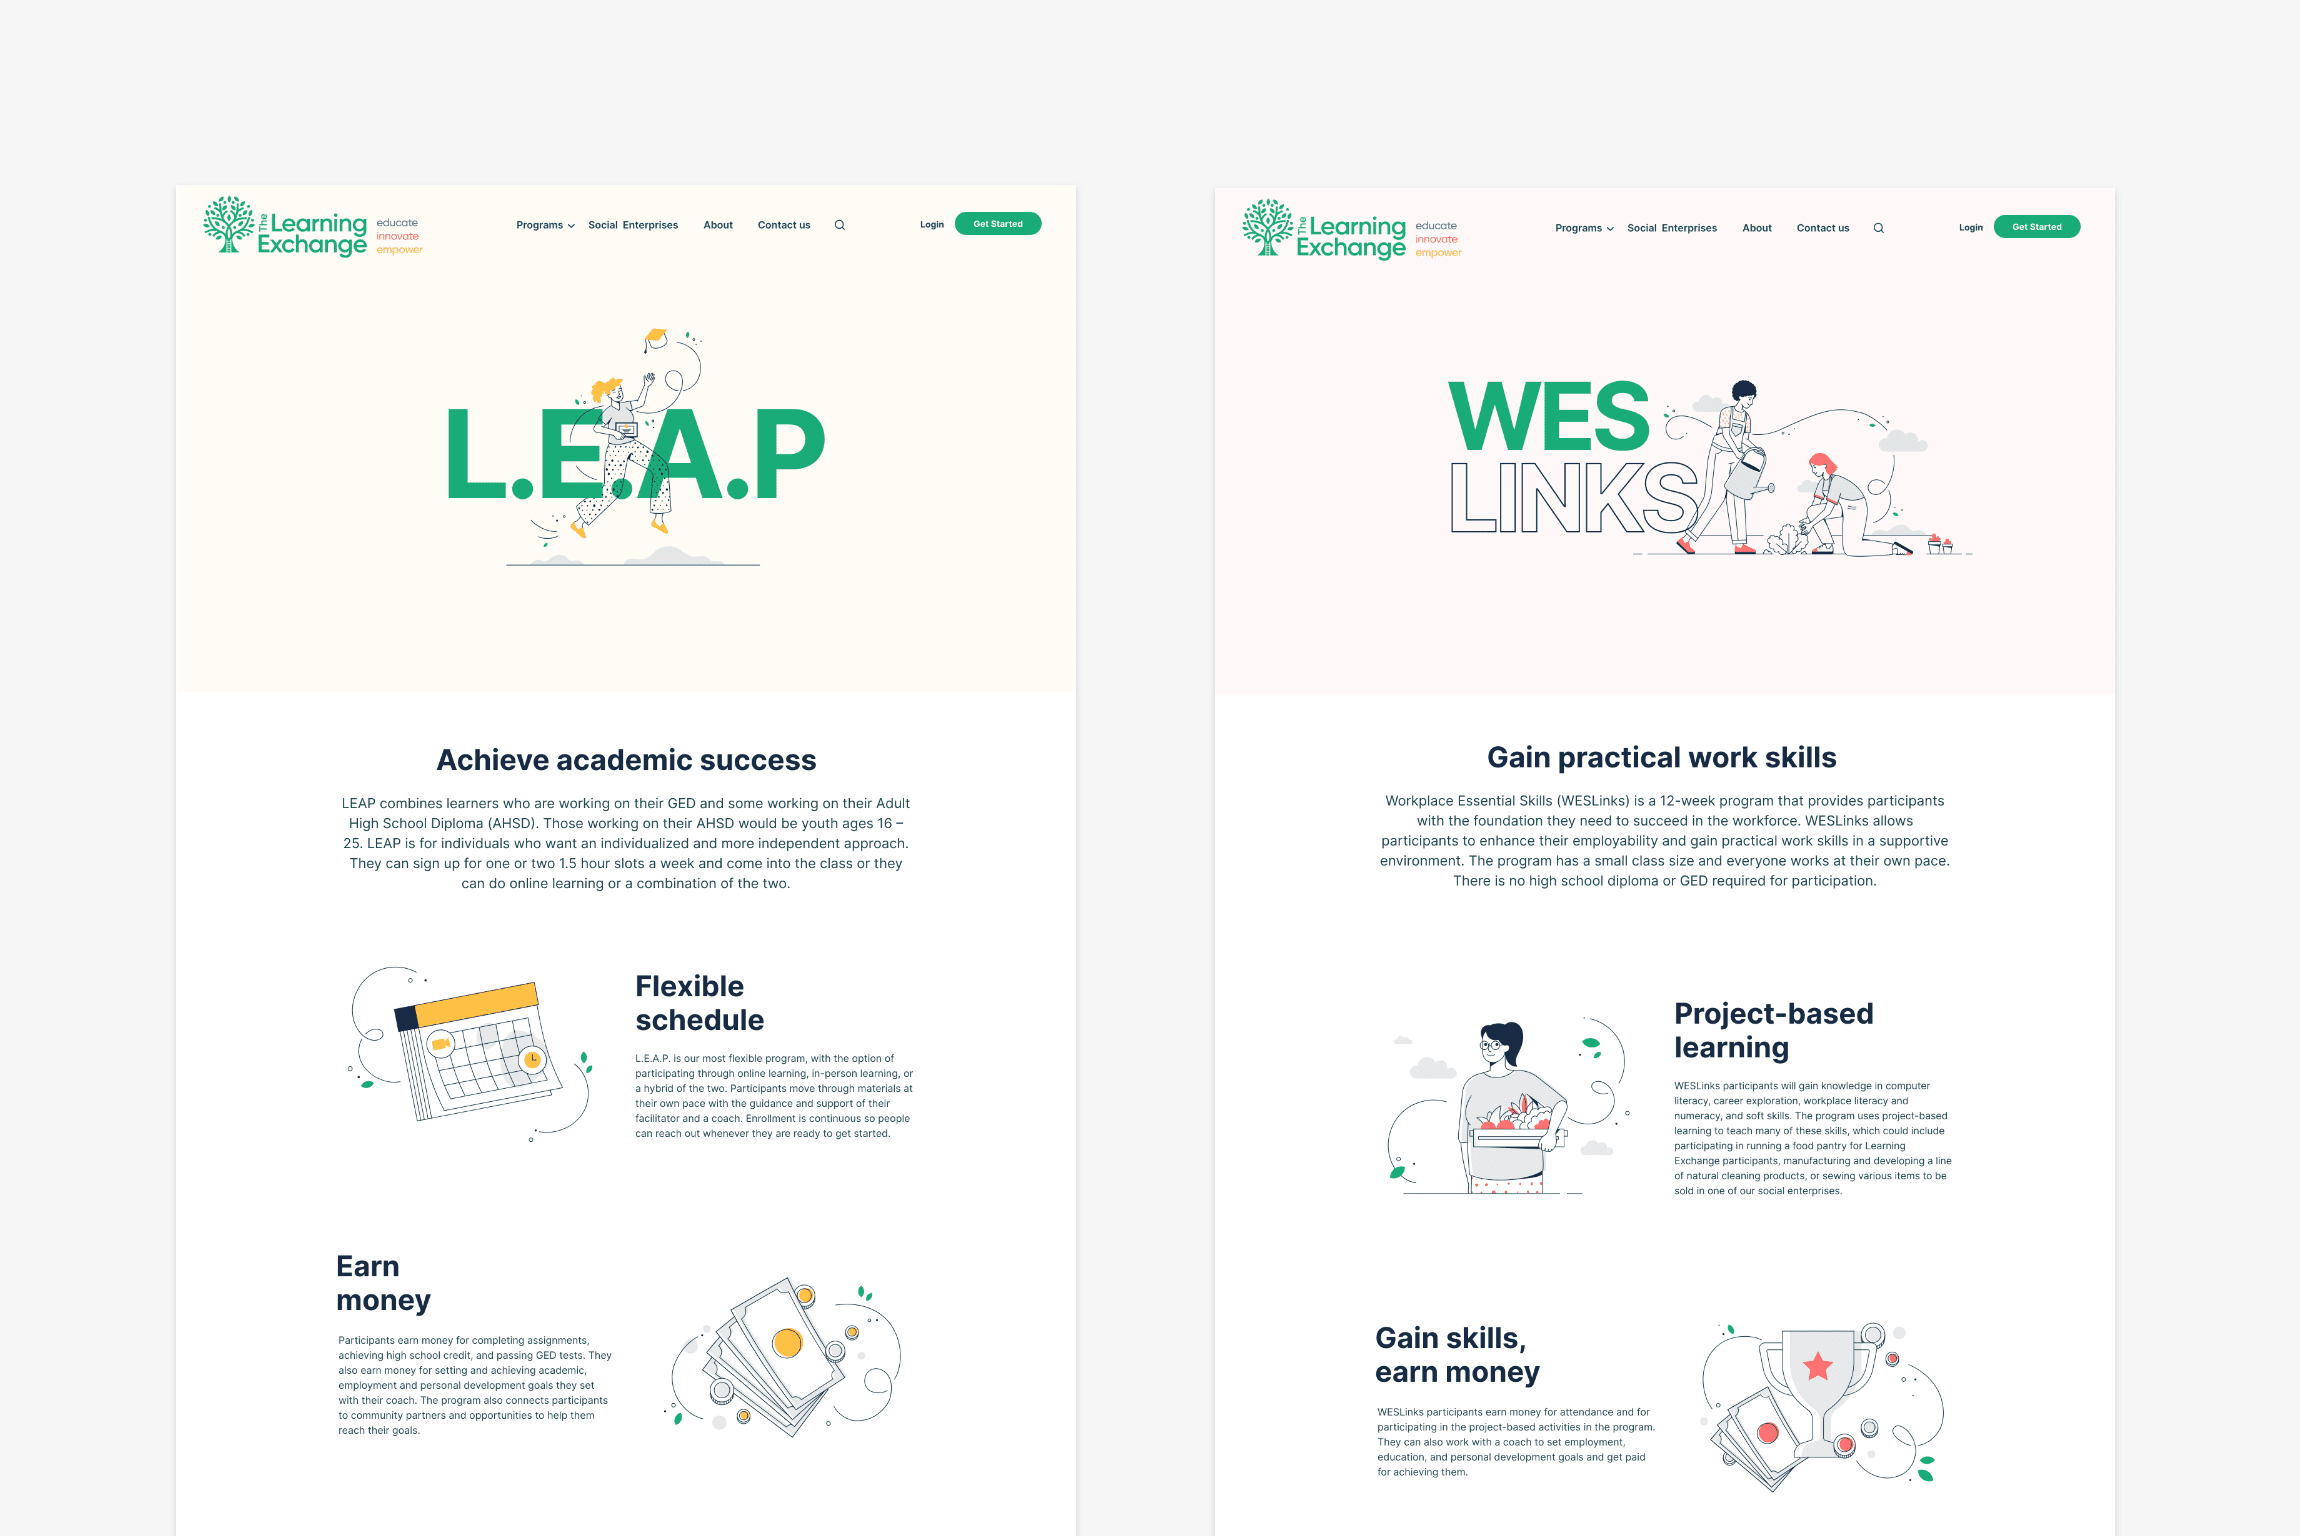 The Learning Exchange page designs